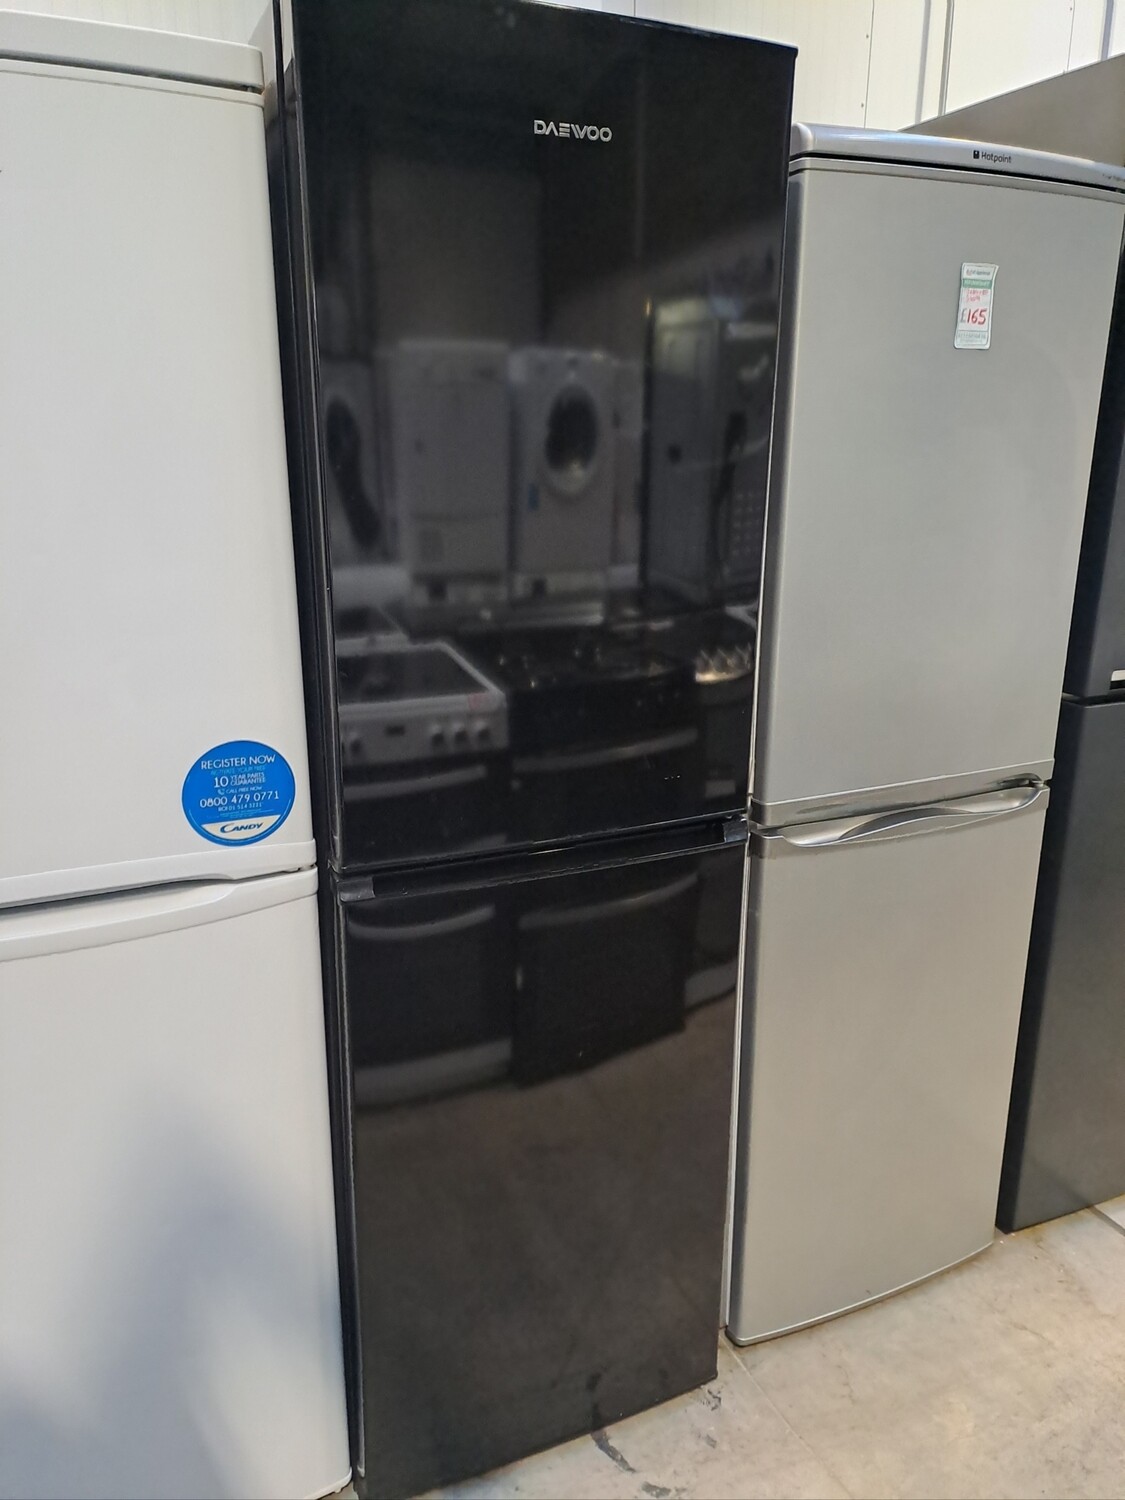 Daewoo DFF470SB Fridge Freezer Black H180 x W55 Refurbished. This item is located in our Whitby Road Shop 